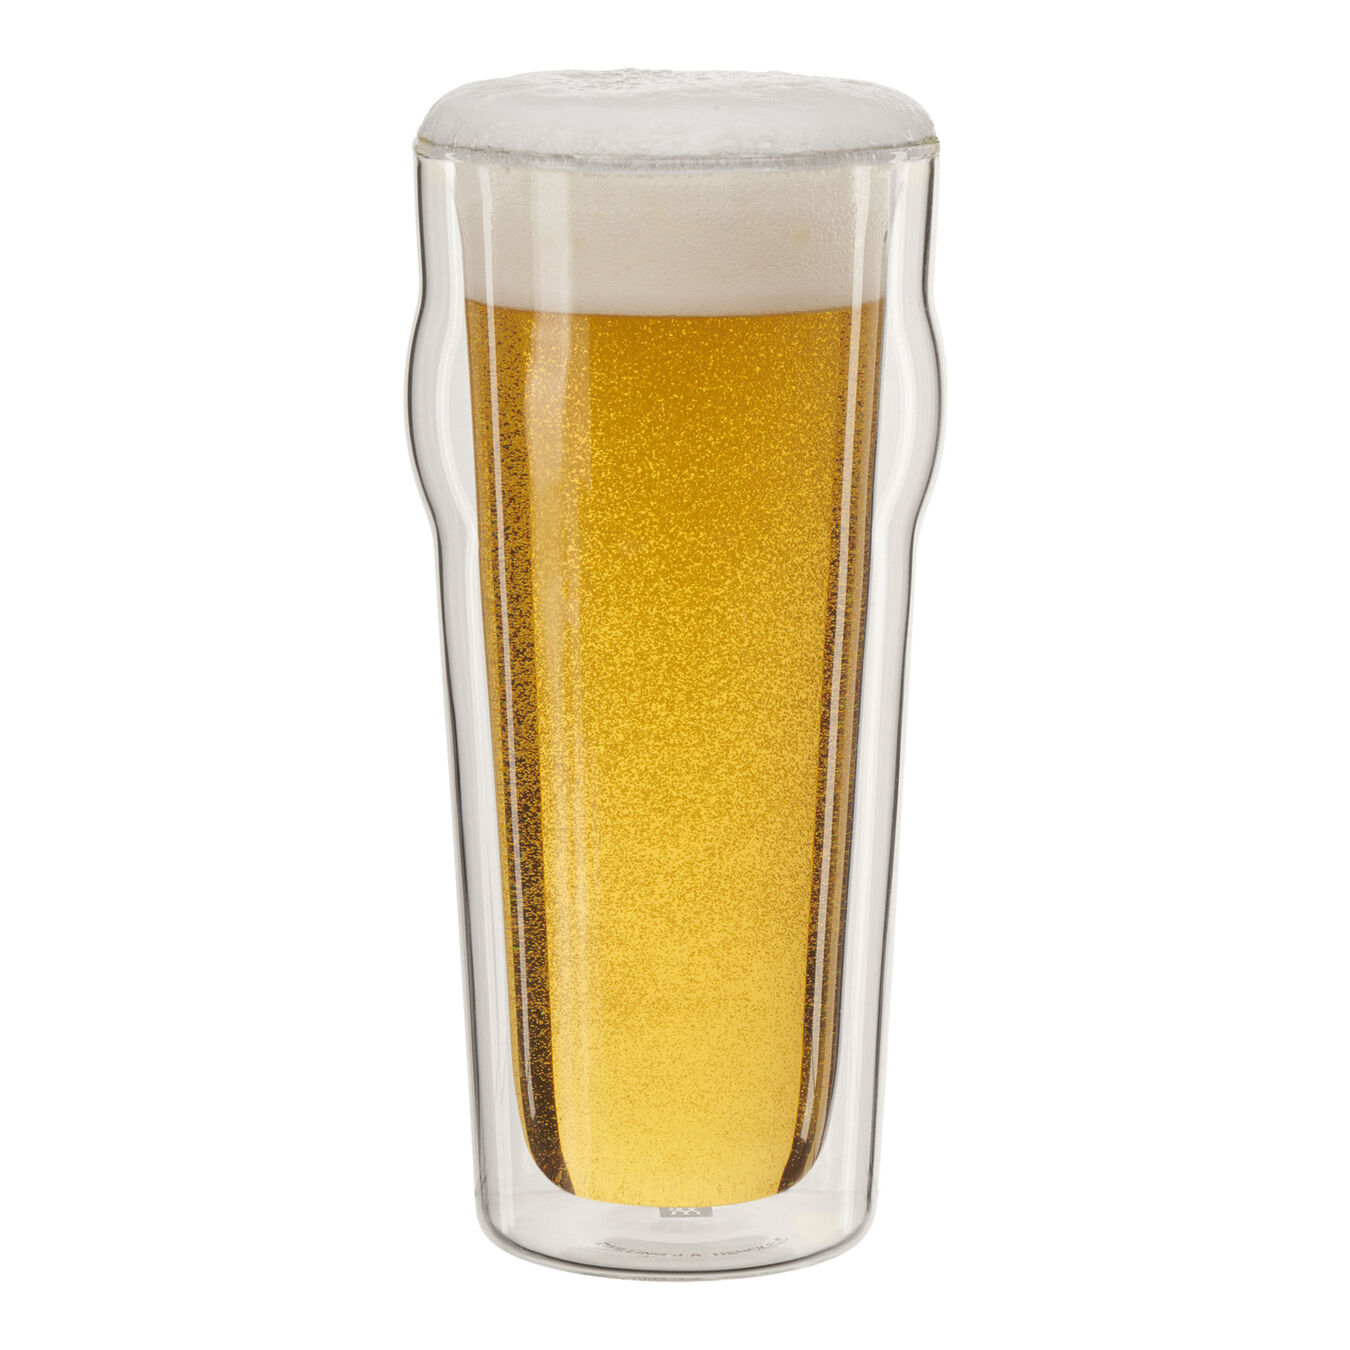 2-pc, Pint Beer Glass Set,,large 1